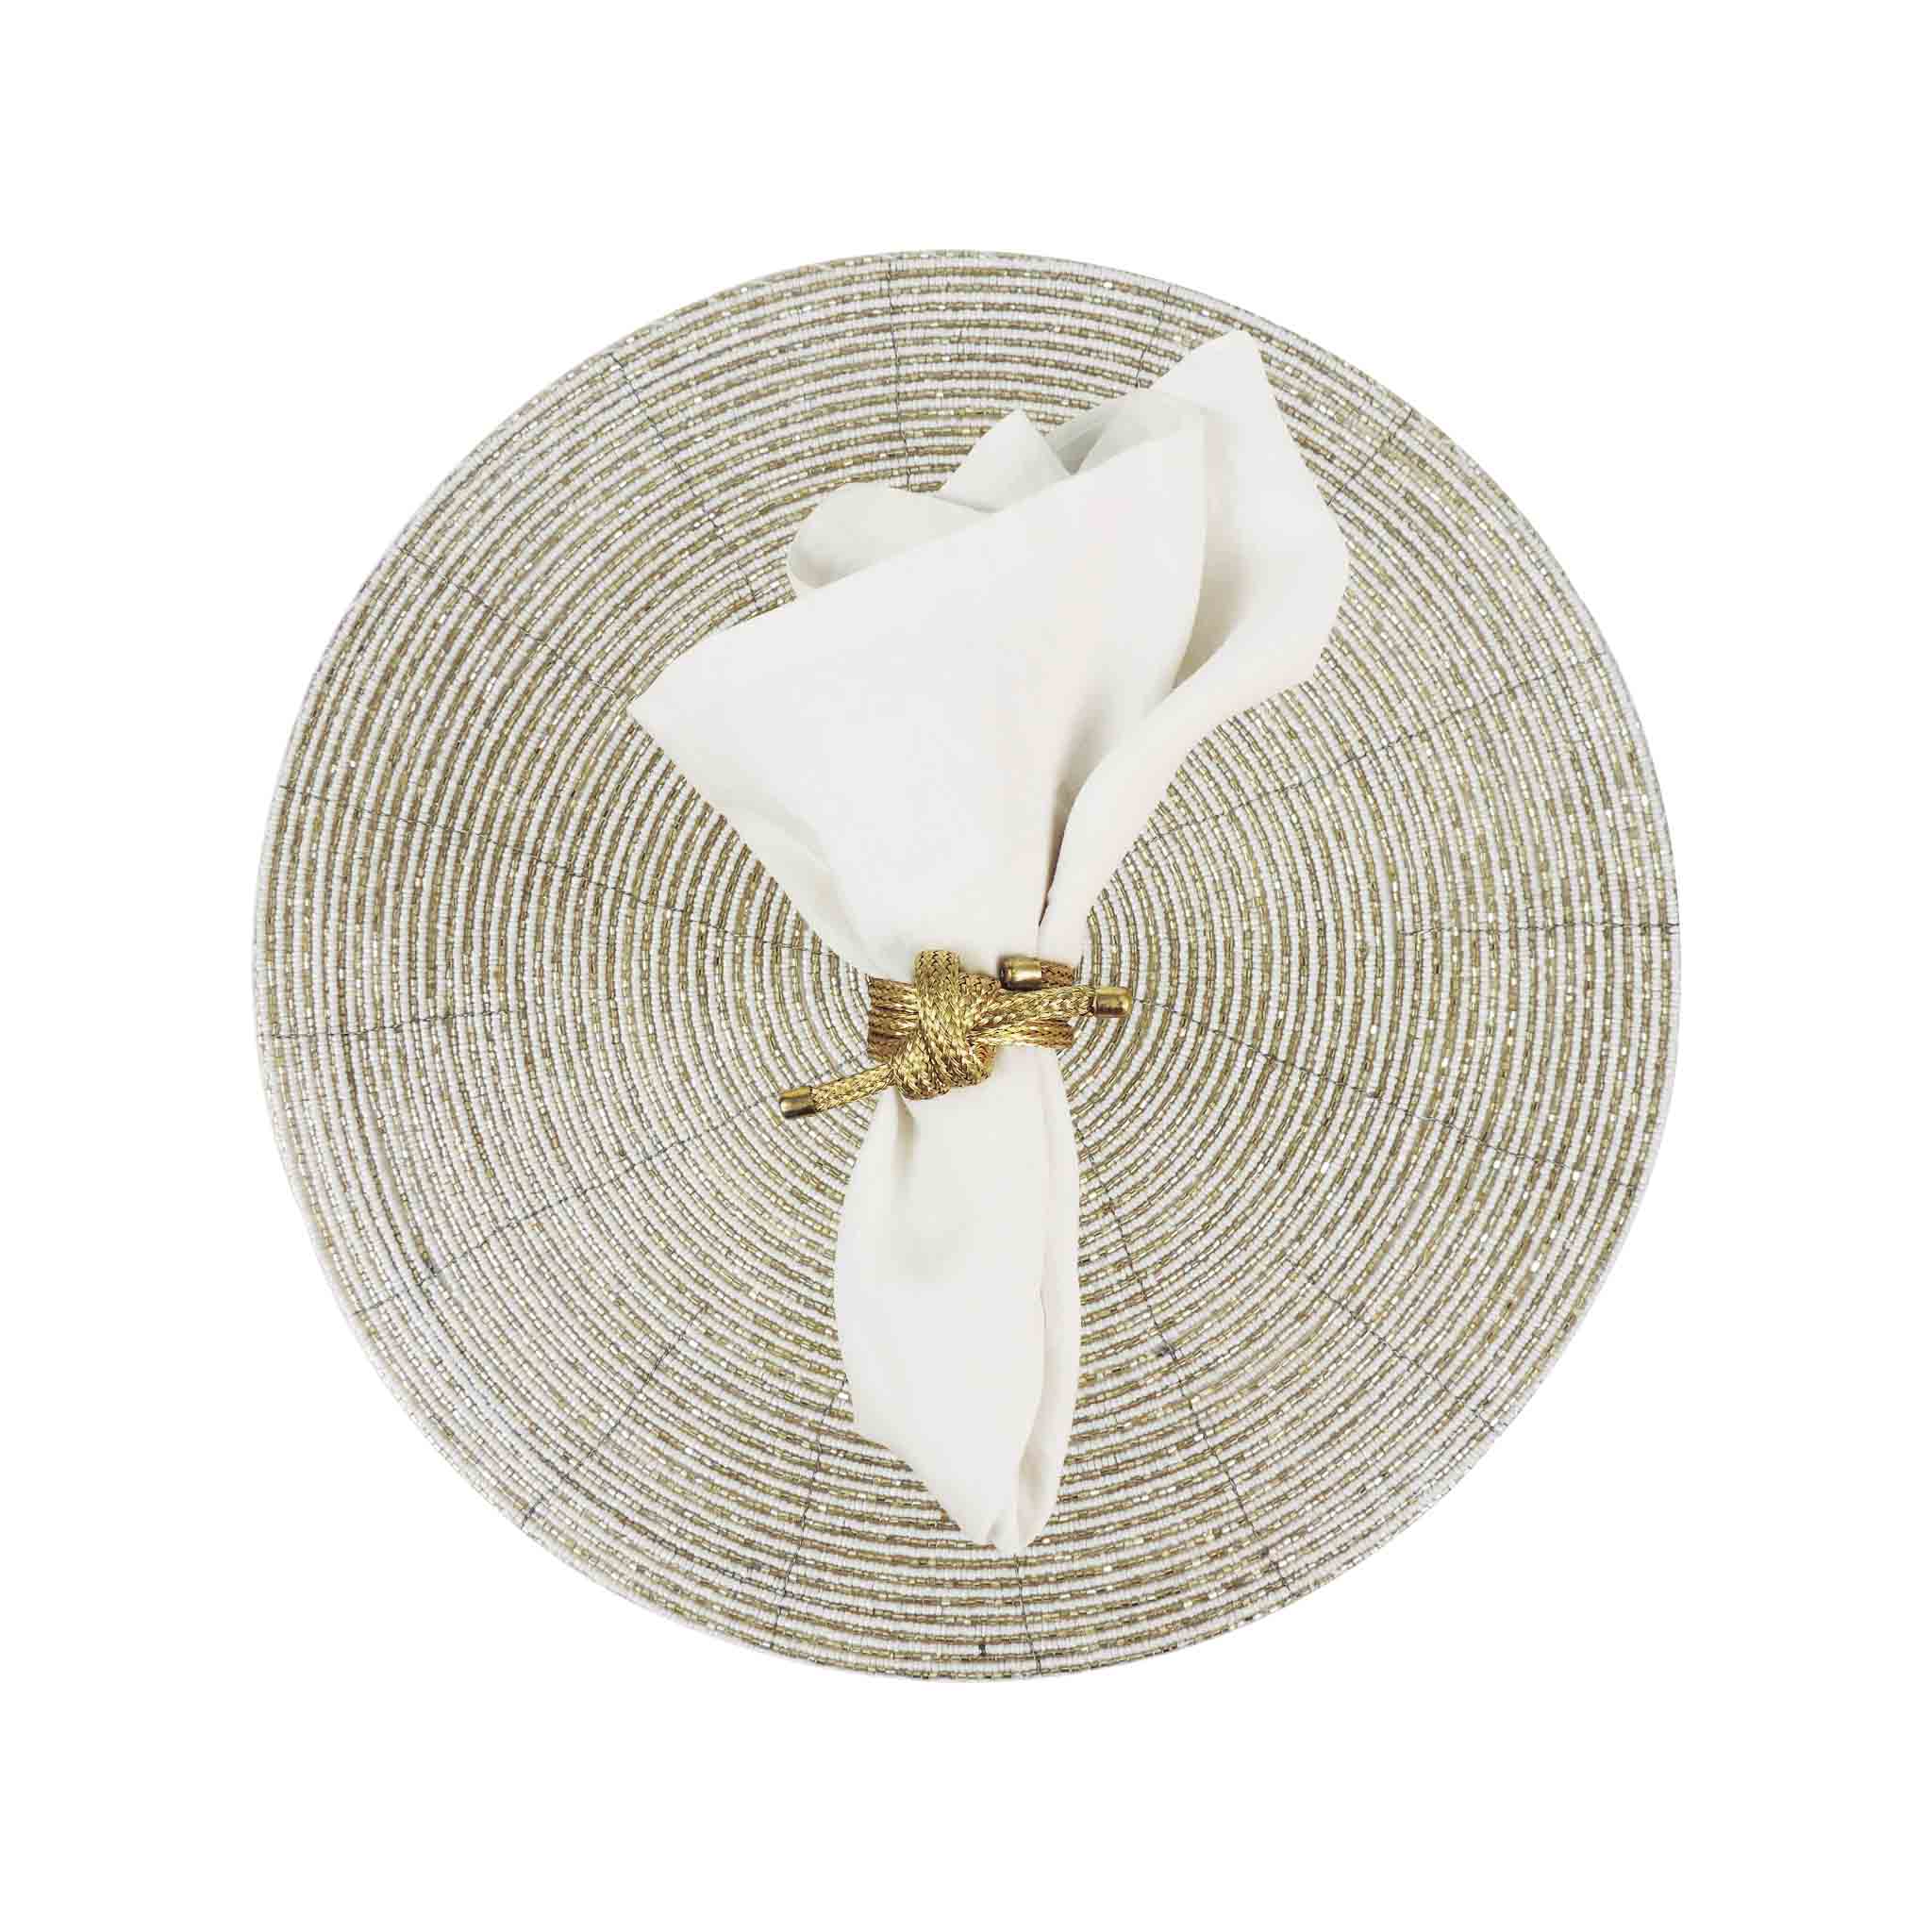 Glass Beaded Placemat in Gold & Cream, Set of 4